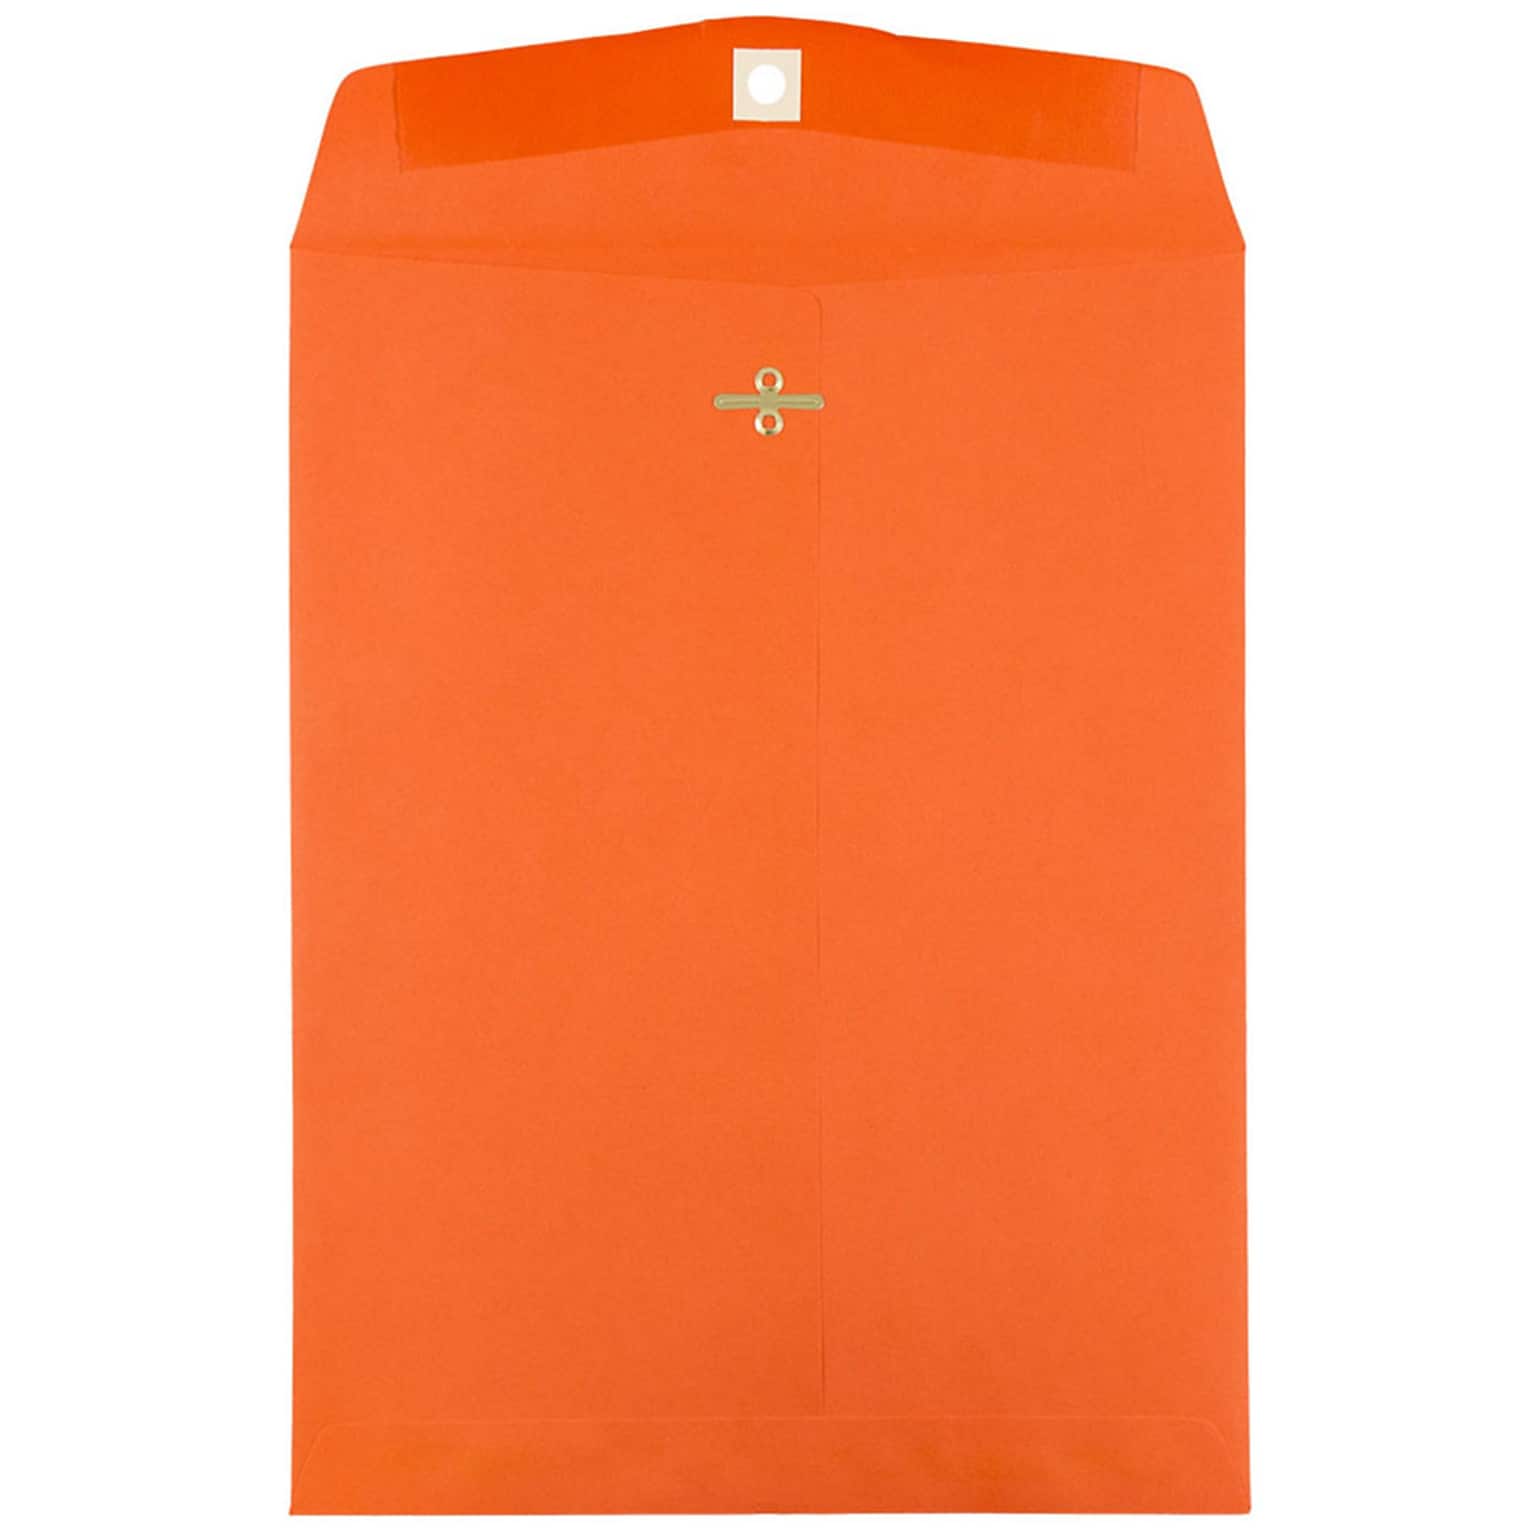 JAM Paper 9 x 12 Open End Catalog Colored Envelopes with Clasp Closure, Orange Recycled, 10/Pack (92938B)